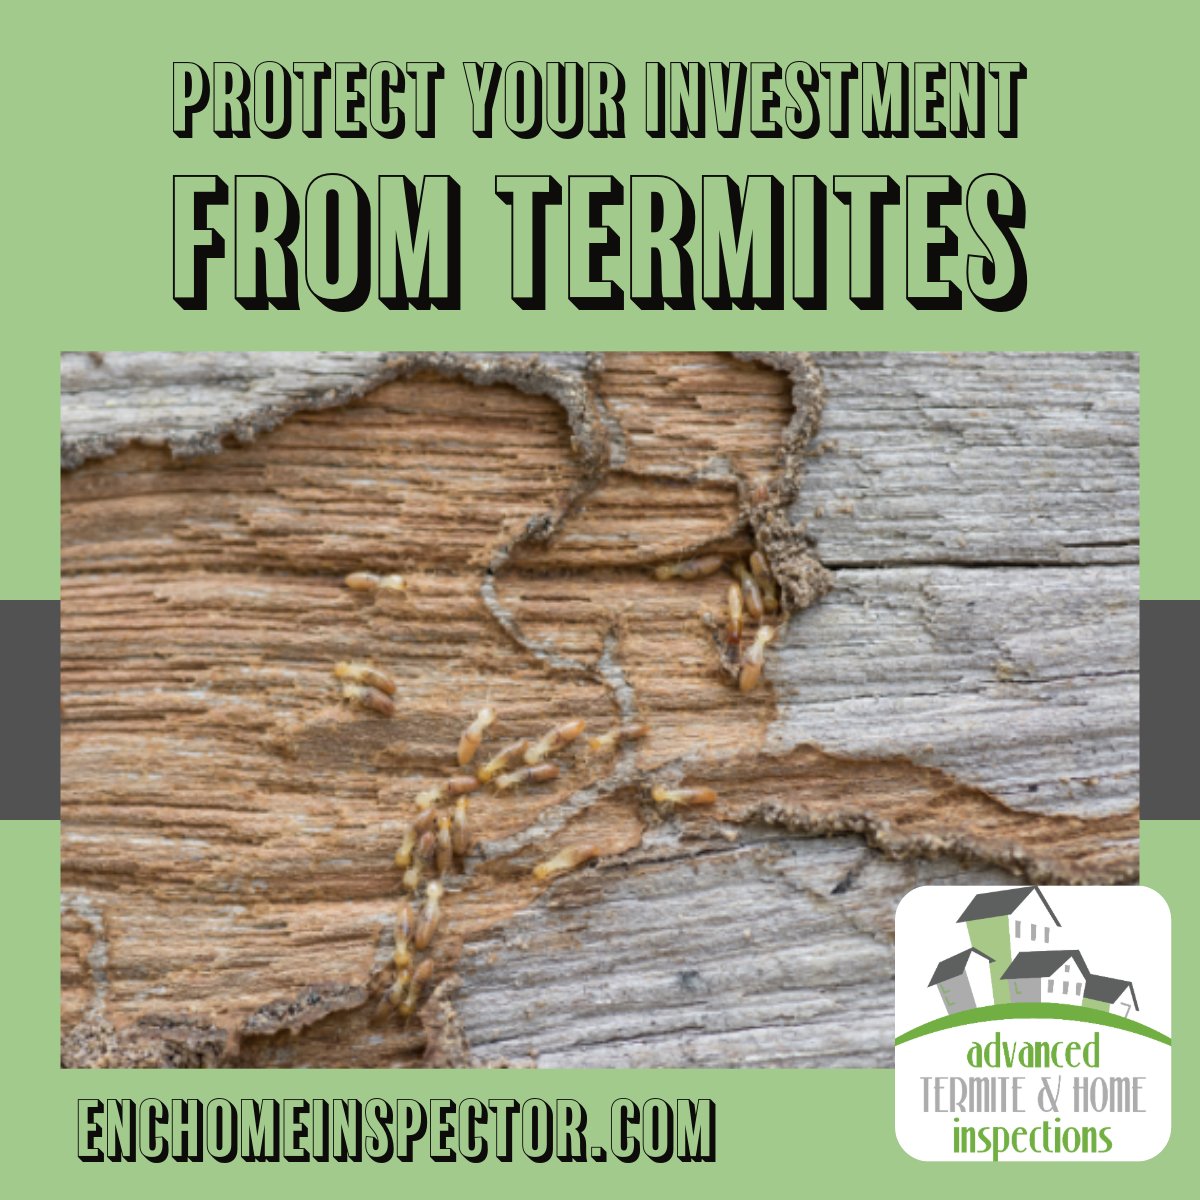 Call on Advanced to Defend Your Home, Conquer Termites and have Unyielding Protection for Peace of Mind! #termites #termitecontrol #termiteinspection #WDO #VALoan #homeinspection #termiteinspector